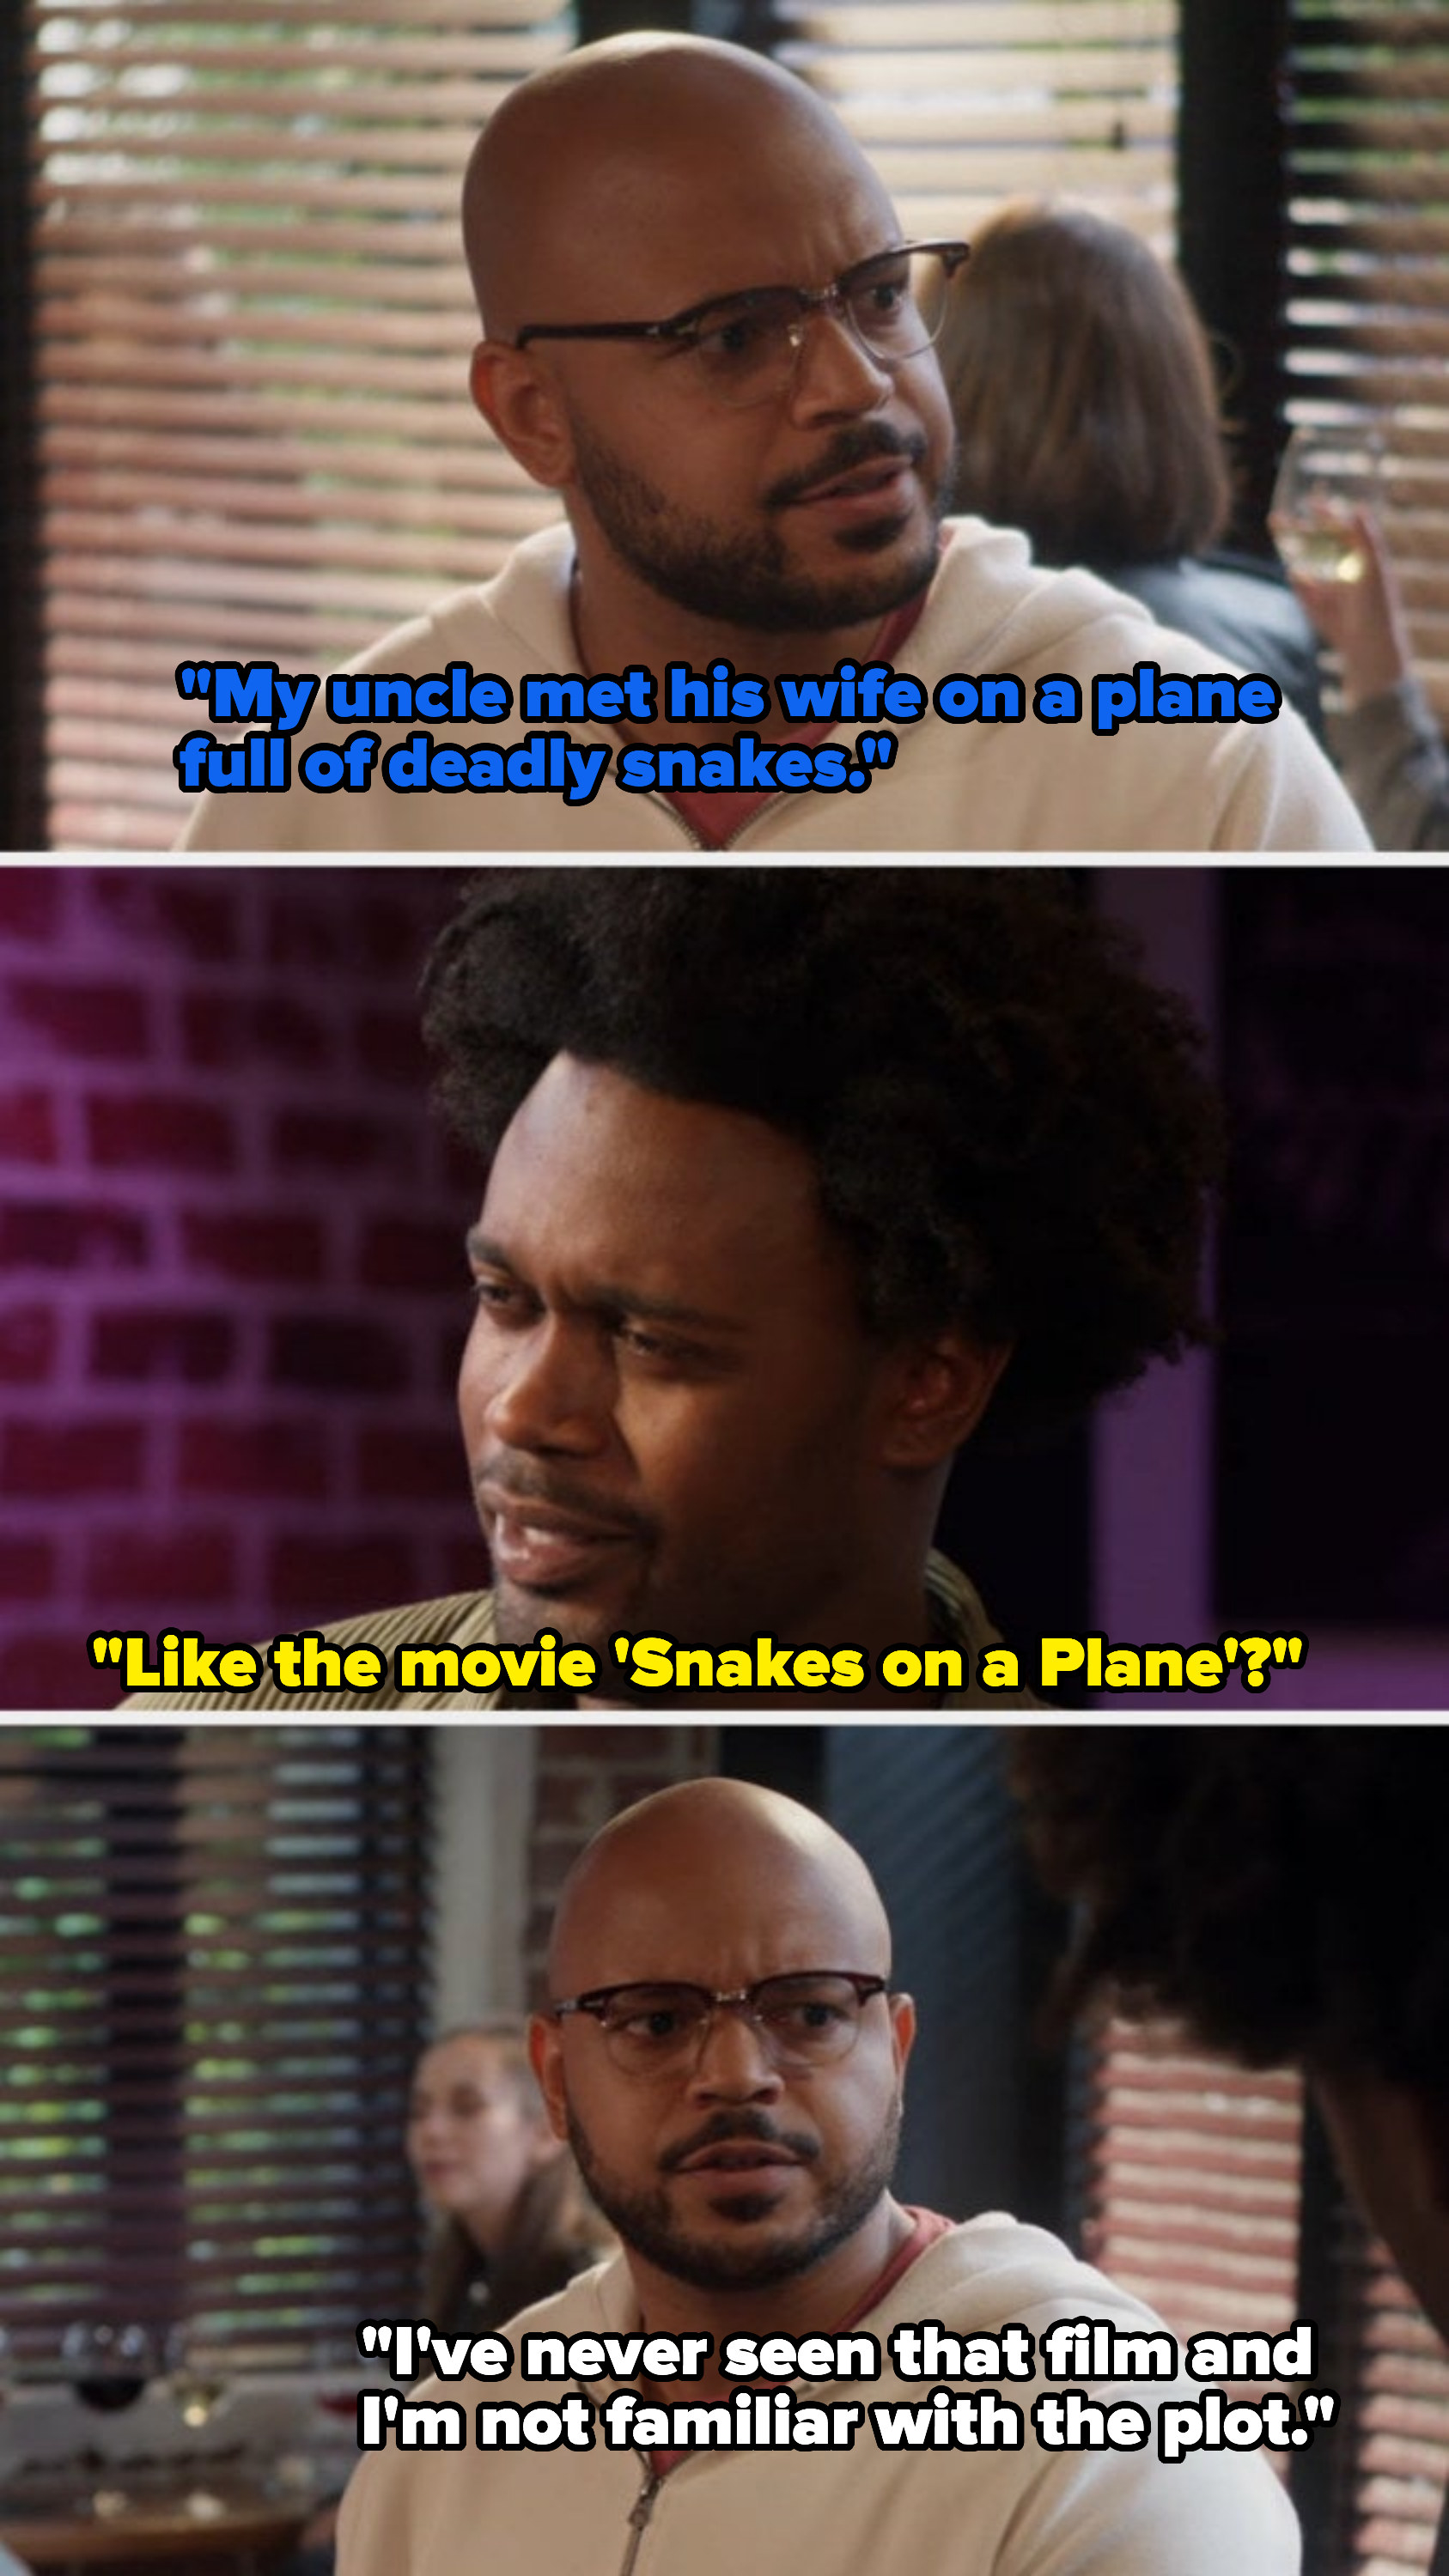 Noah learns that Wyatt has an uncle who met the love of his life during a real-life  &quot;Snakes on a Plane&quot; scenario